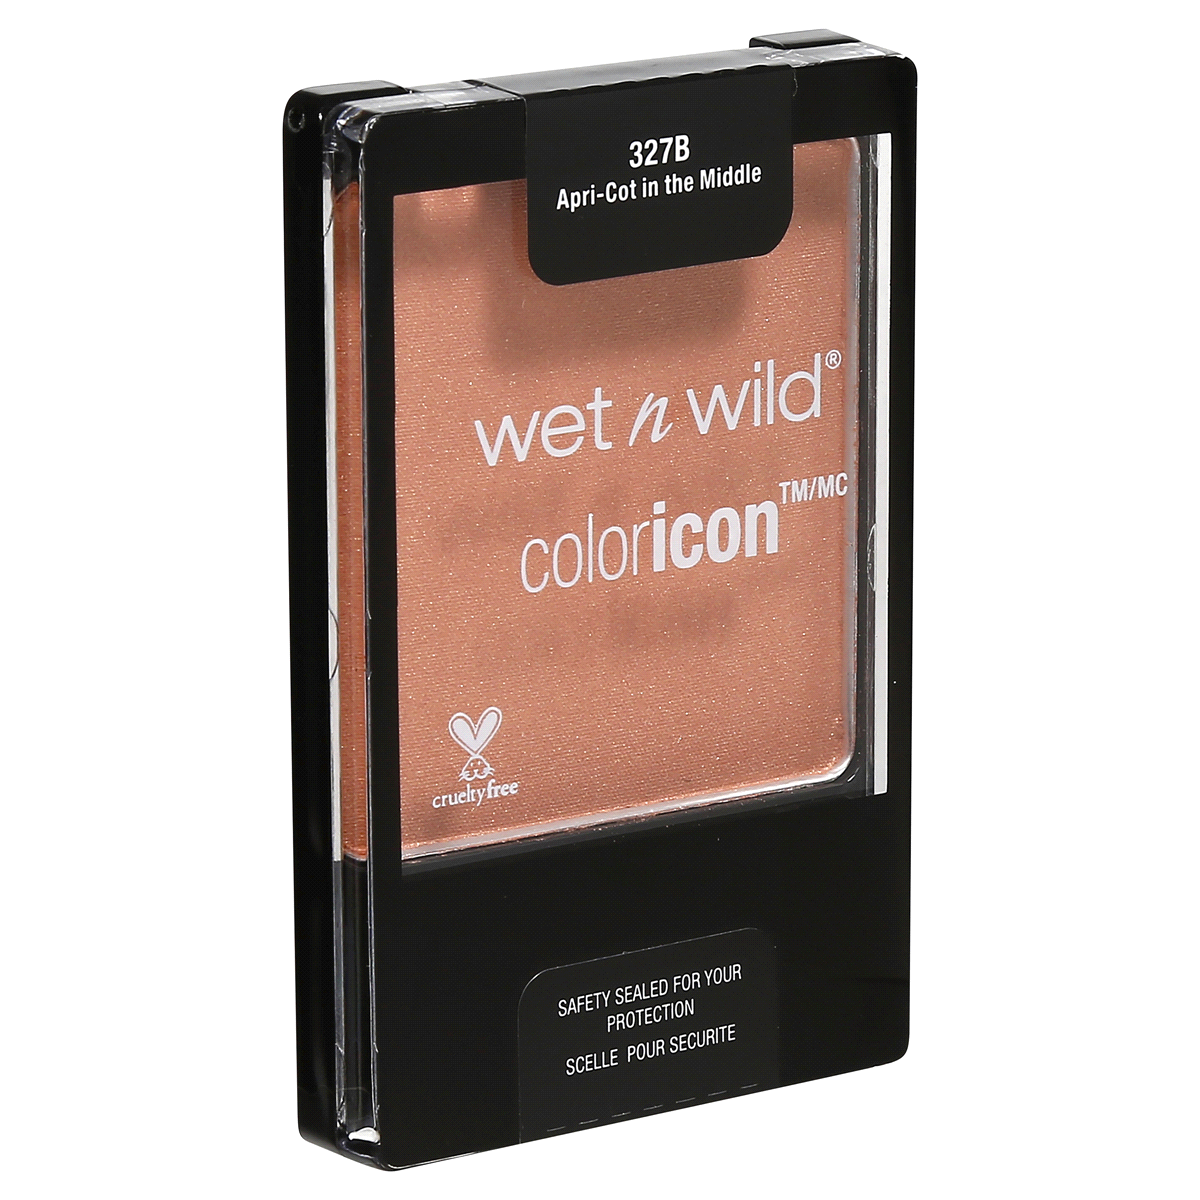 slide 3 of 3, wet n wild Coloricon Blush 327B Apri-Cot in the Middle, 1 ct